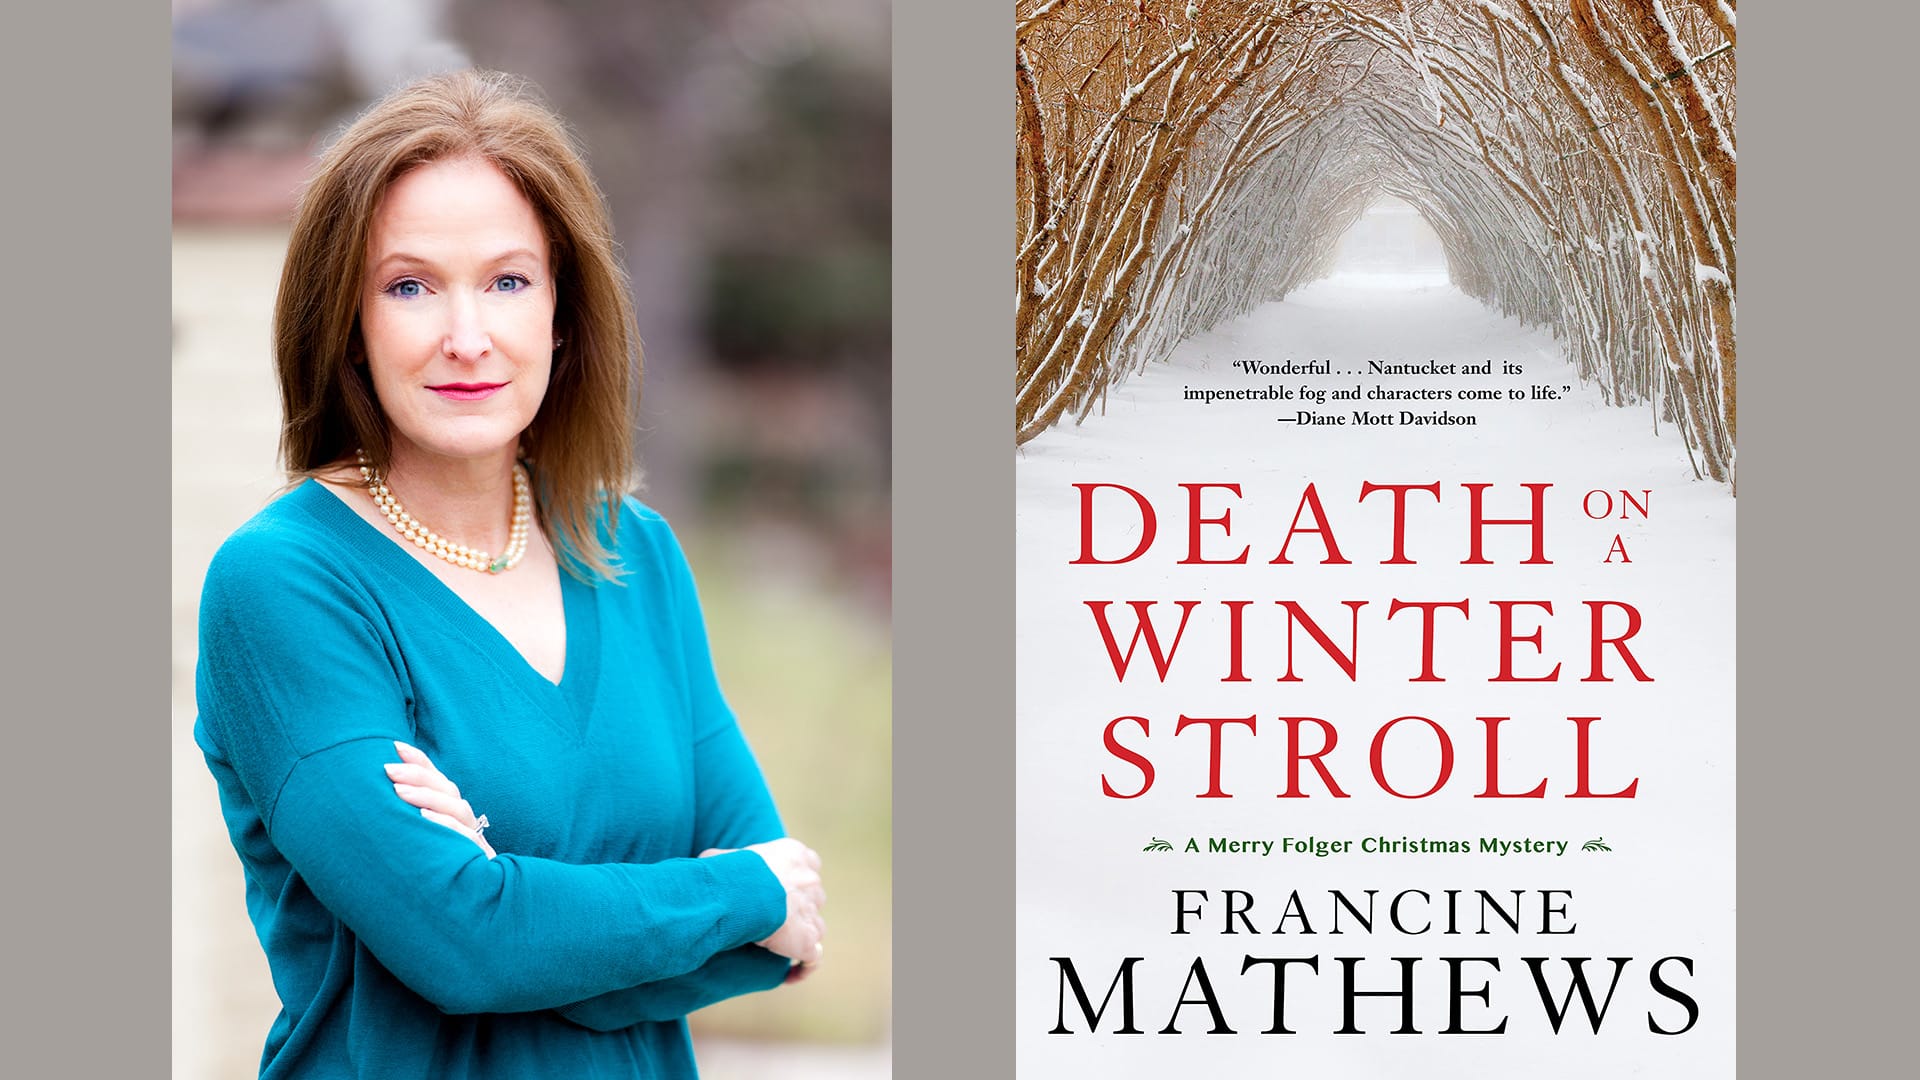 Author Head Shot and book cover of Death on a Winter Stroll by Francine Mathews